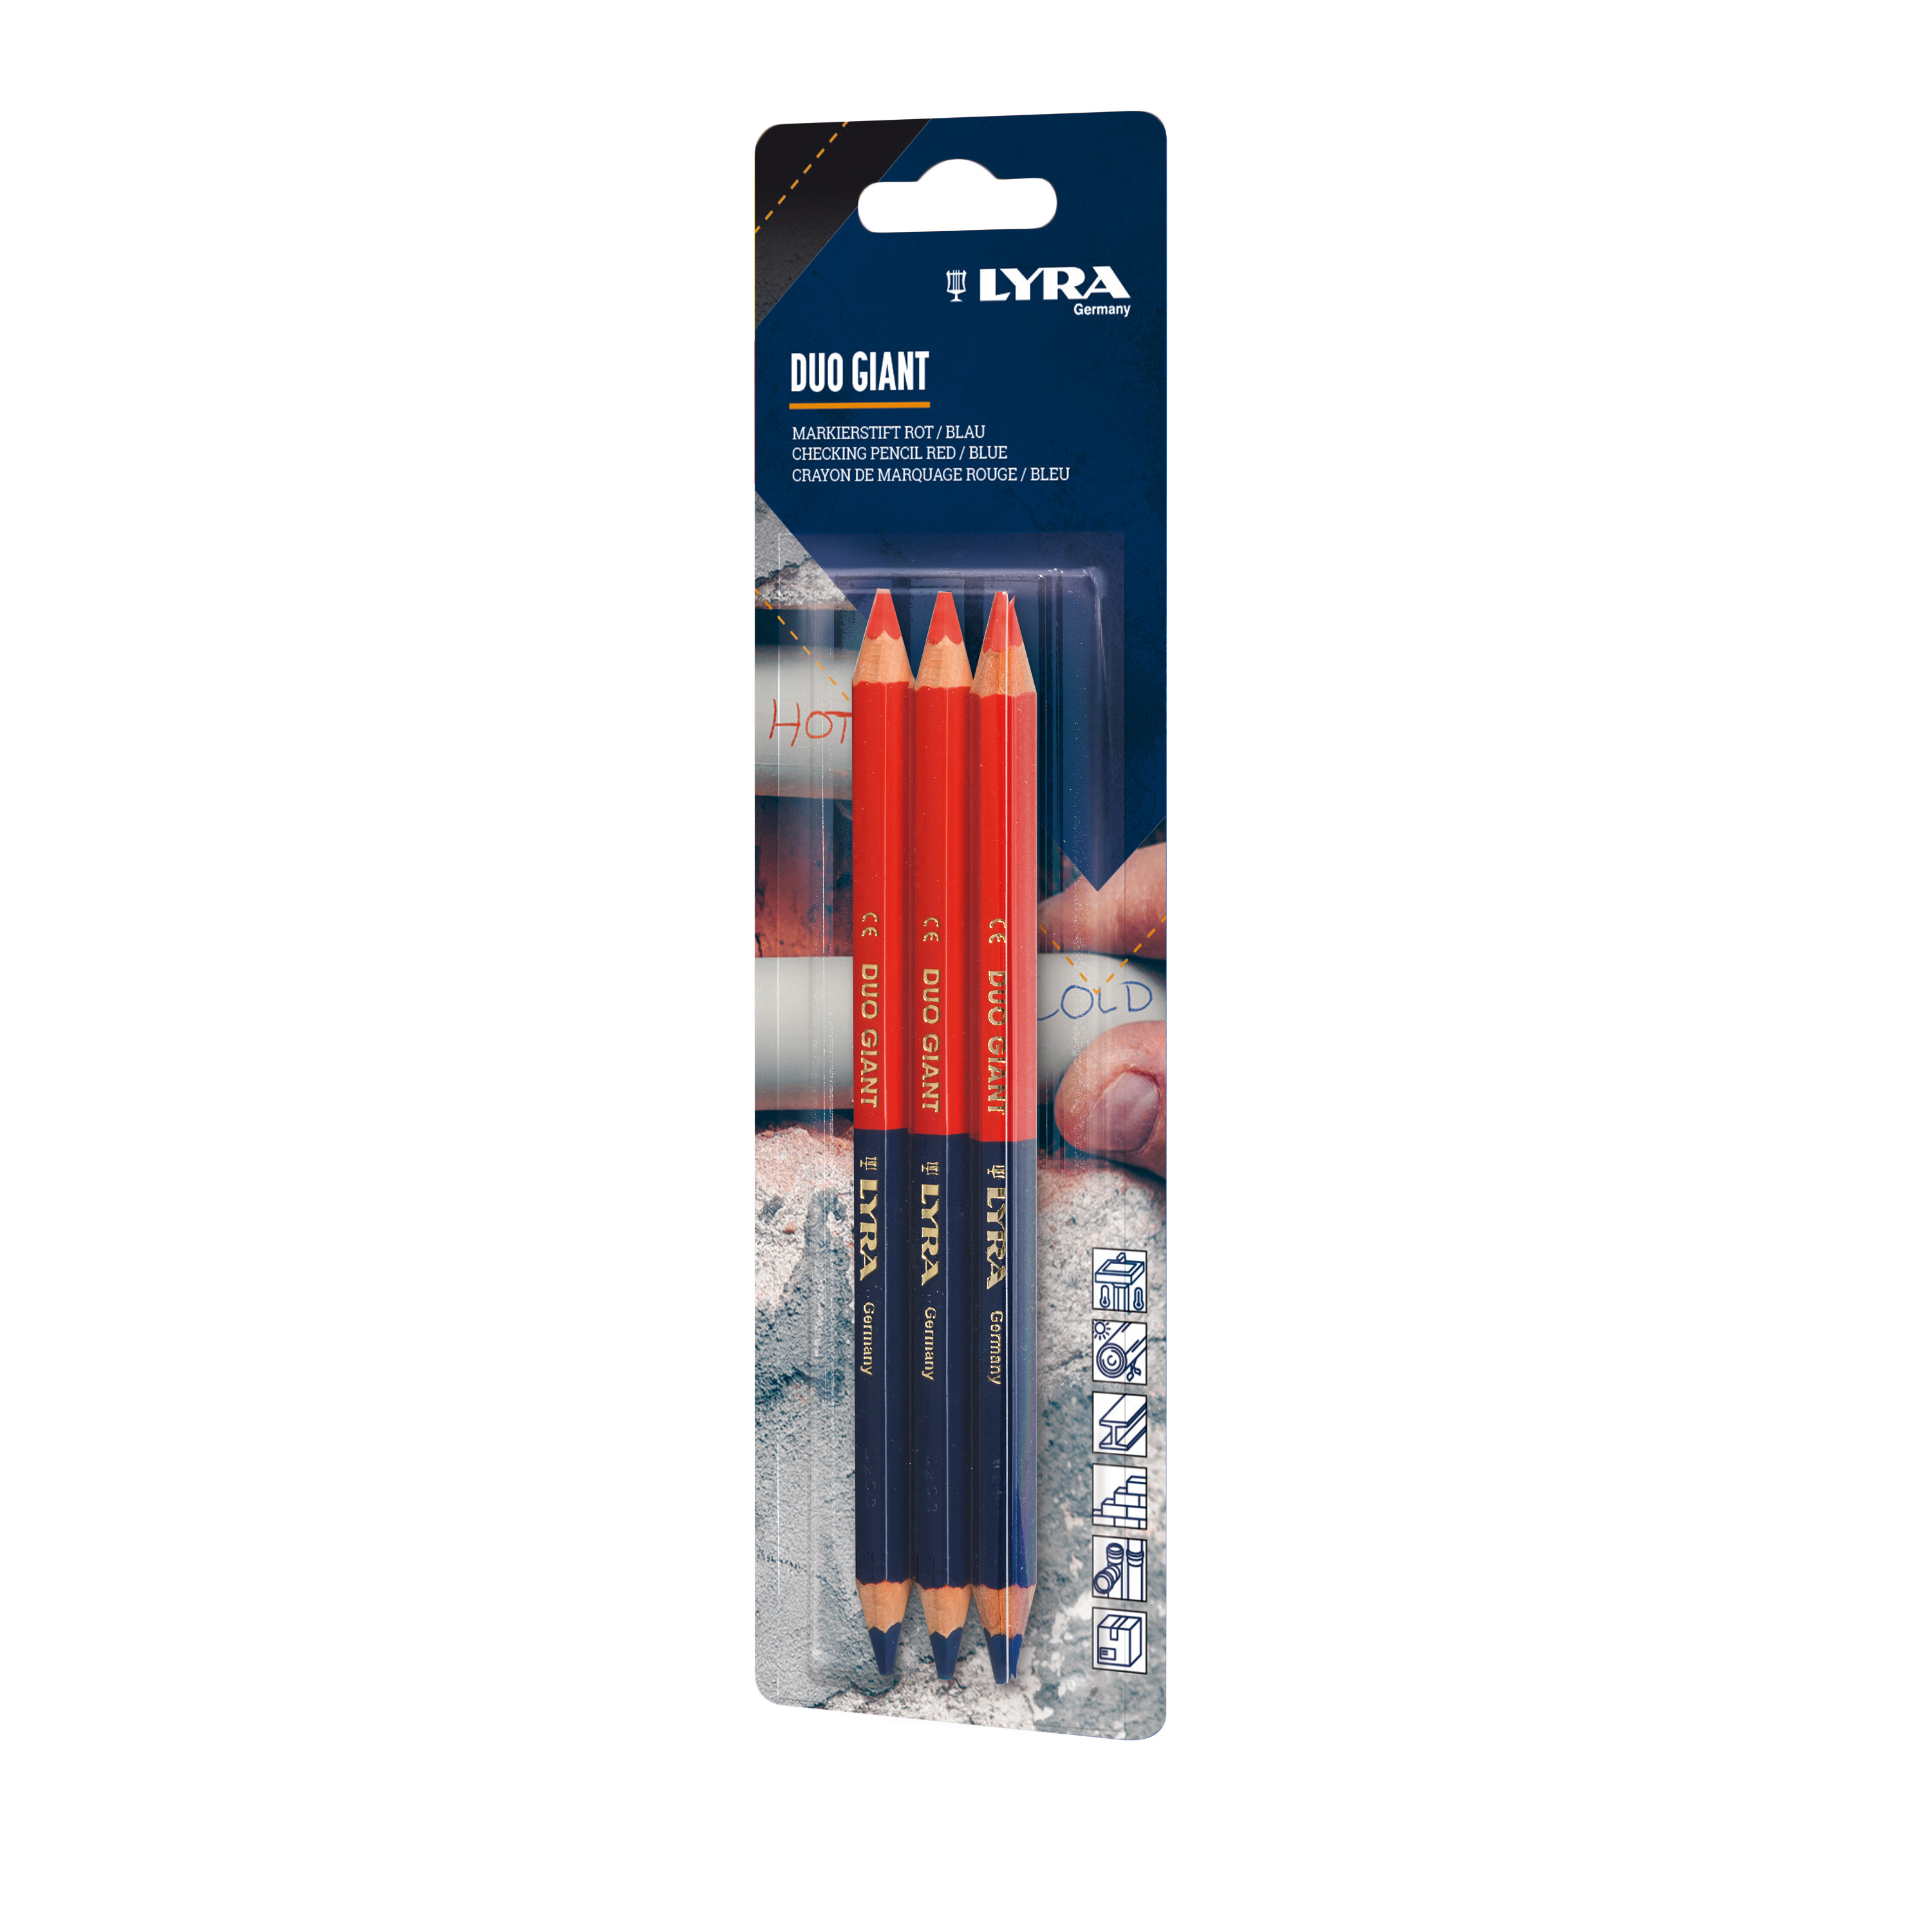 2938002 Potlood DUO GIANT Rood/Blauw 3 st op ZB